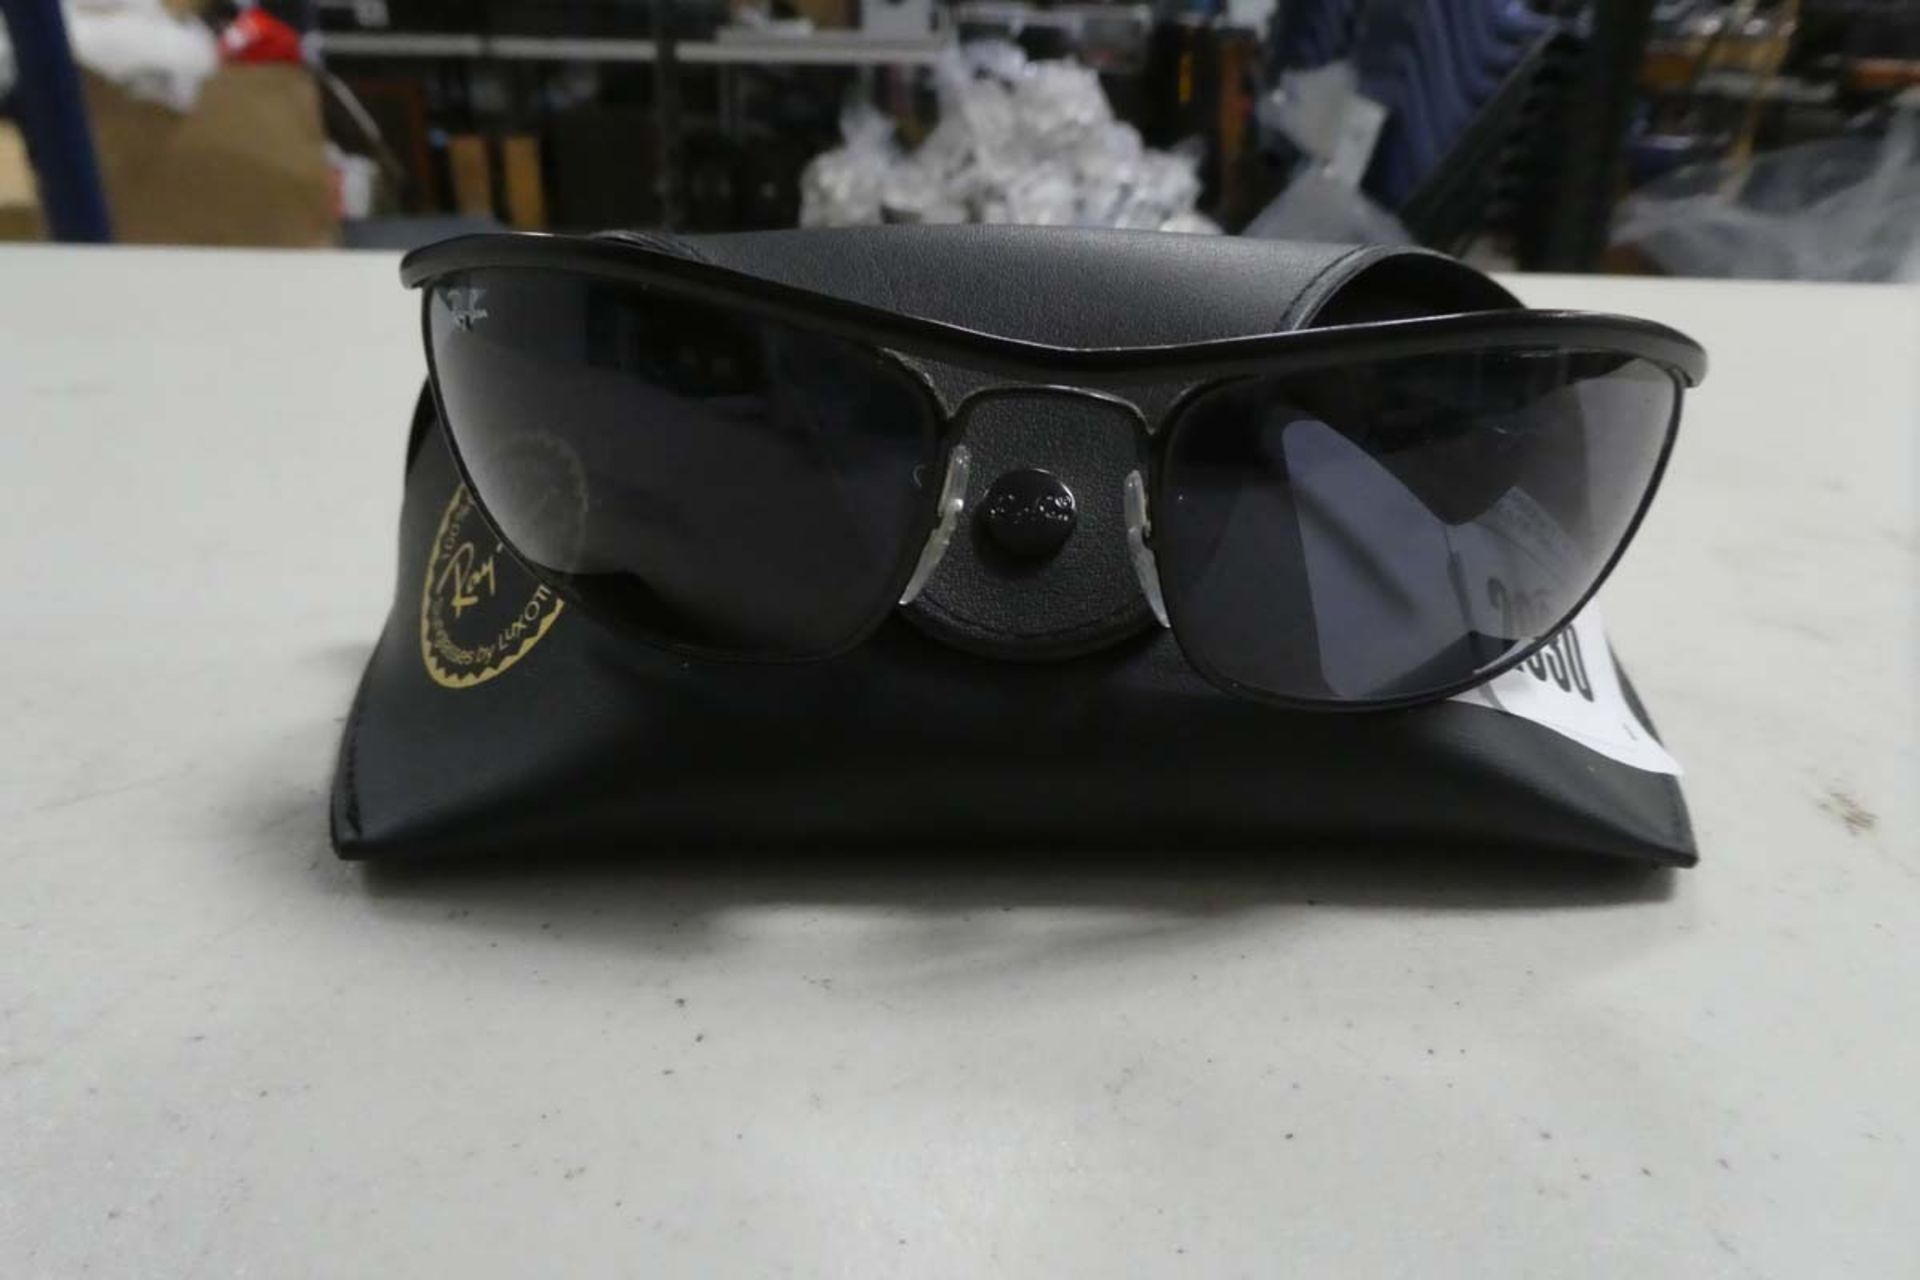 Ray-Ban sunglasses model RB3119 with hard case